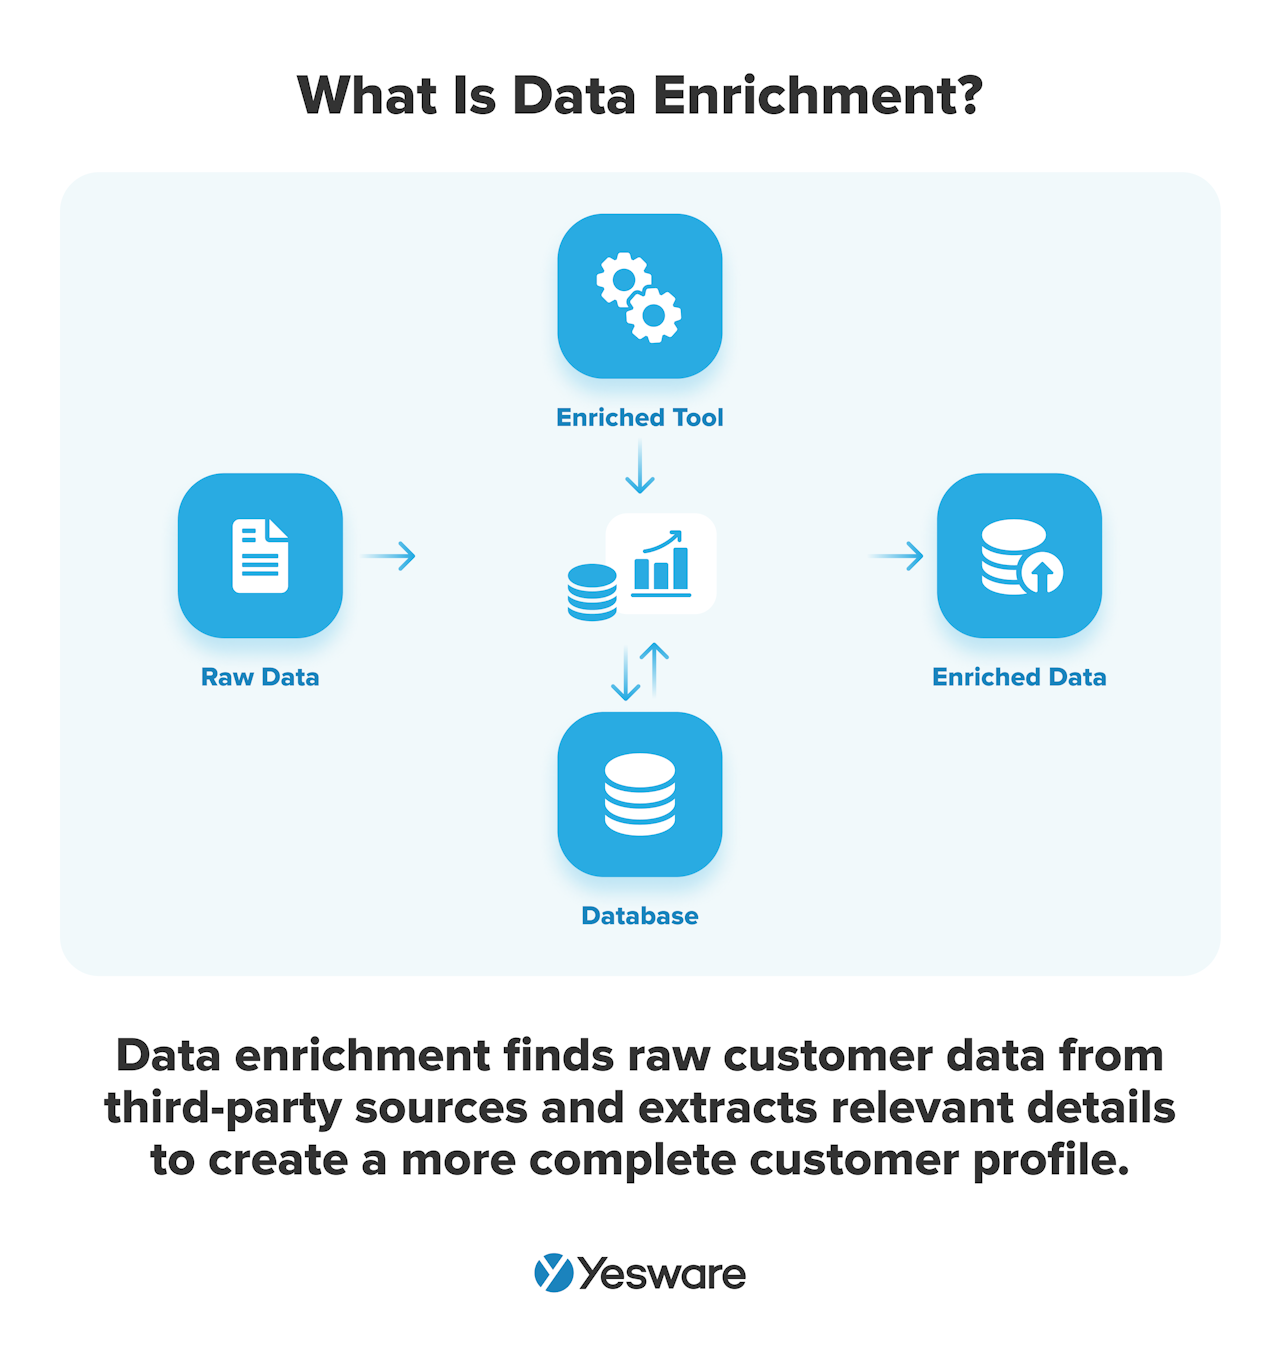 B2B lead database: What is data enrichment?